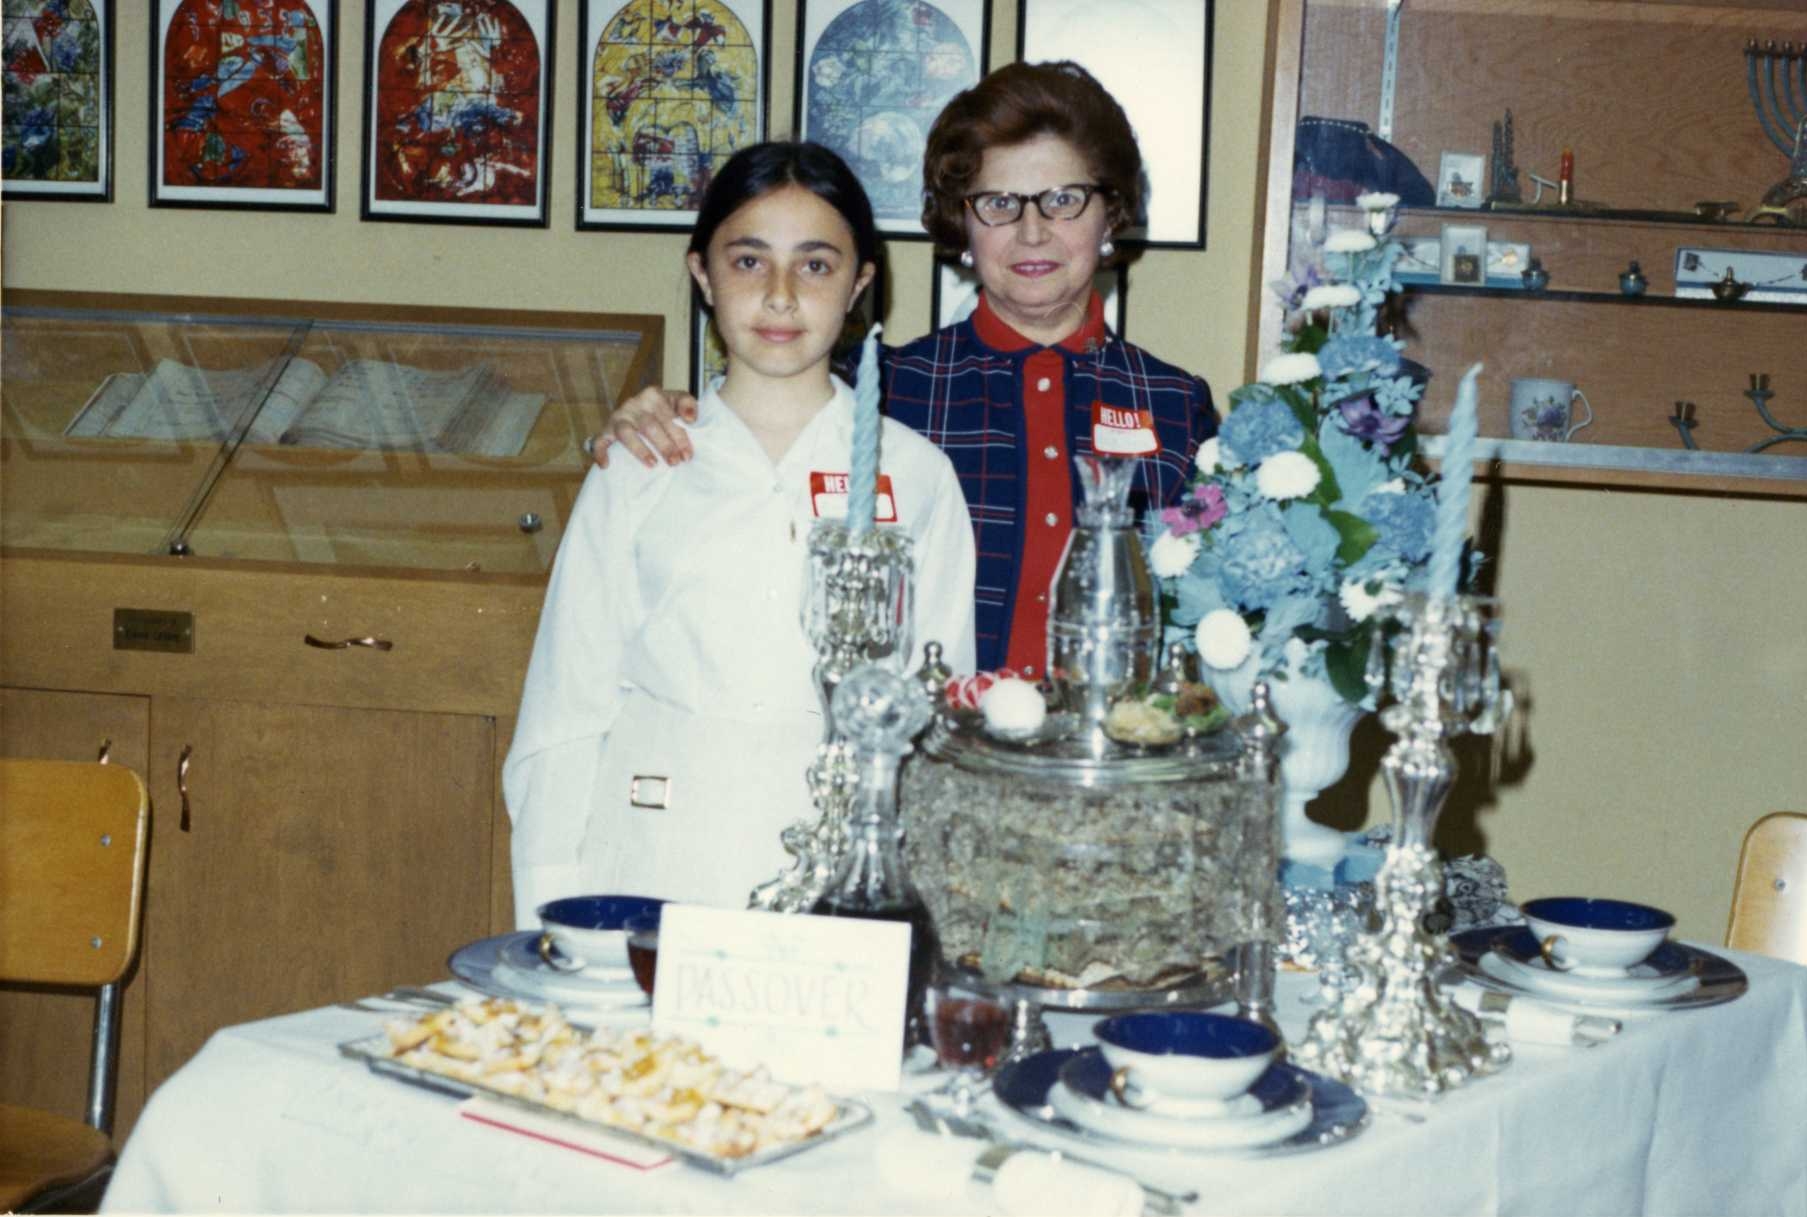 Pictured from left to right: Francine Srour and Stephie Weize.